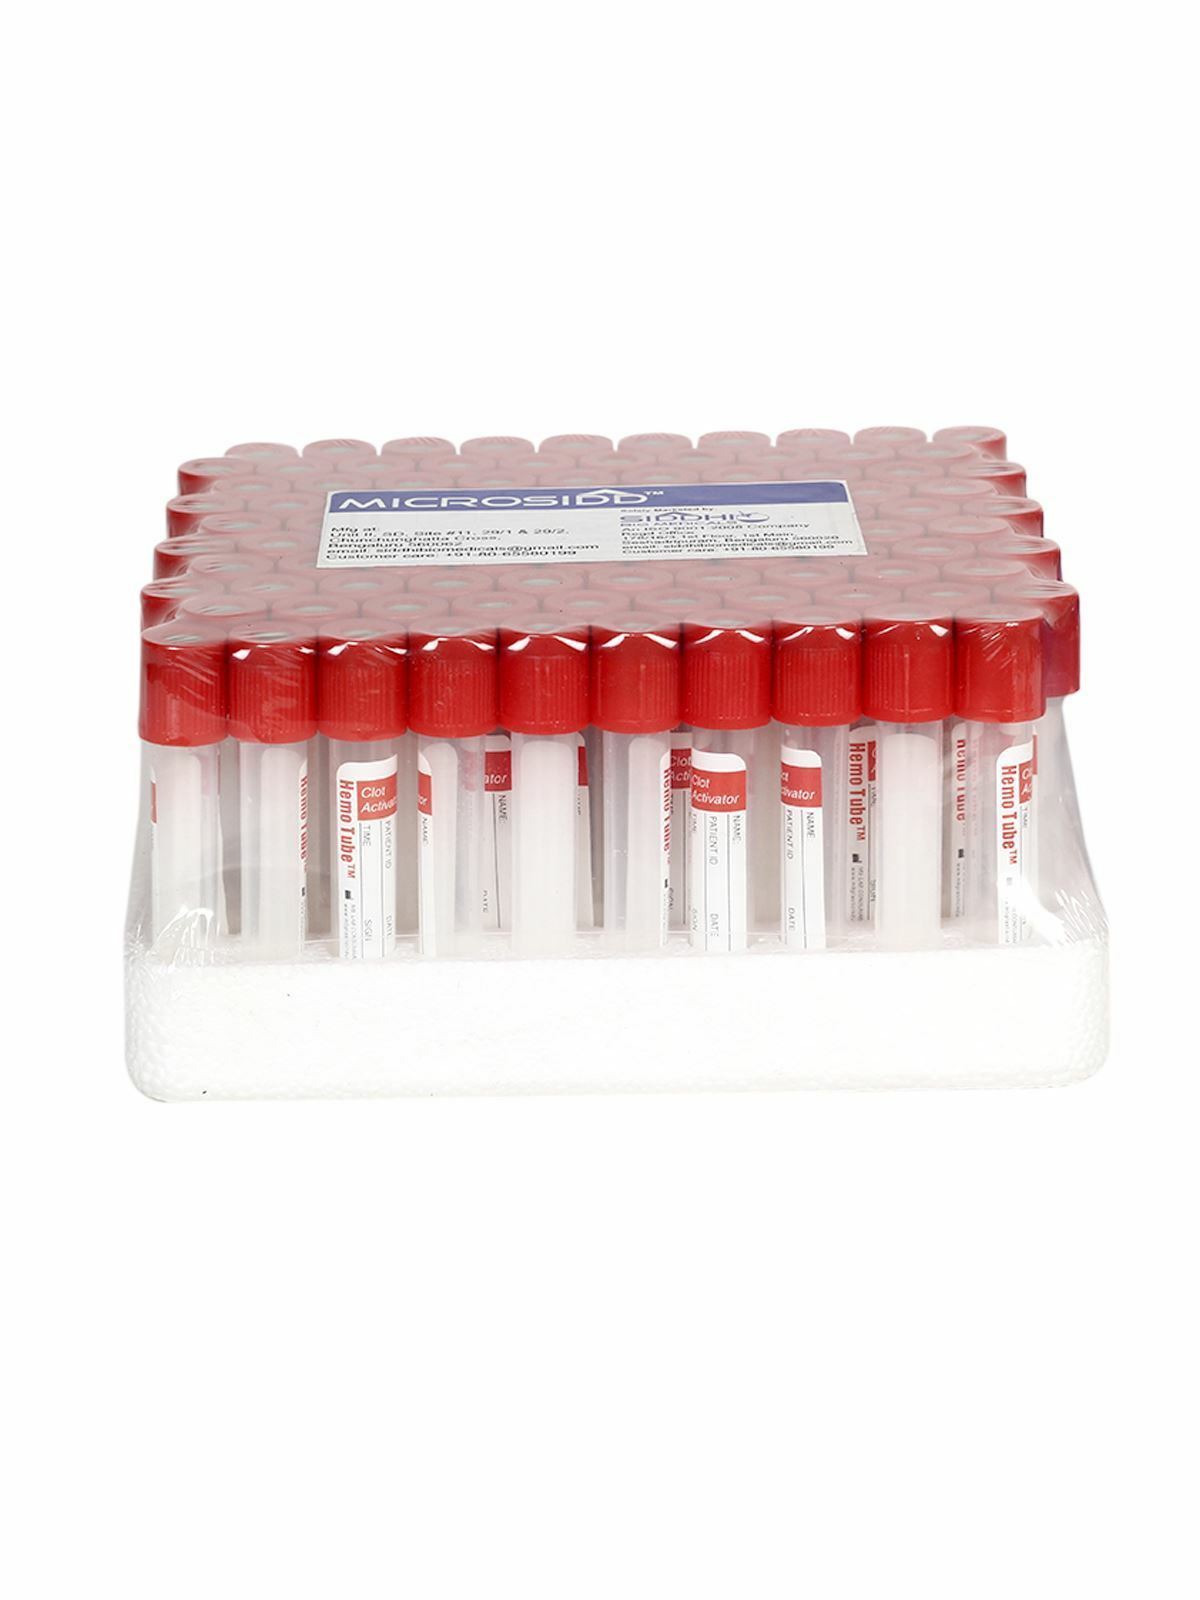 Clot Activator tubes Themocole pack 100's